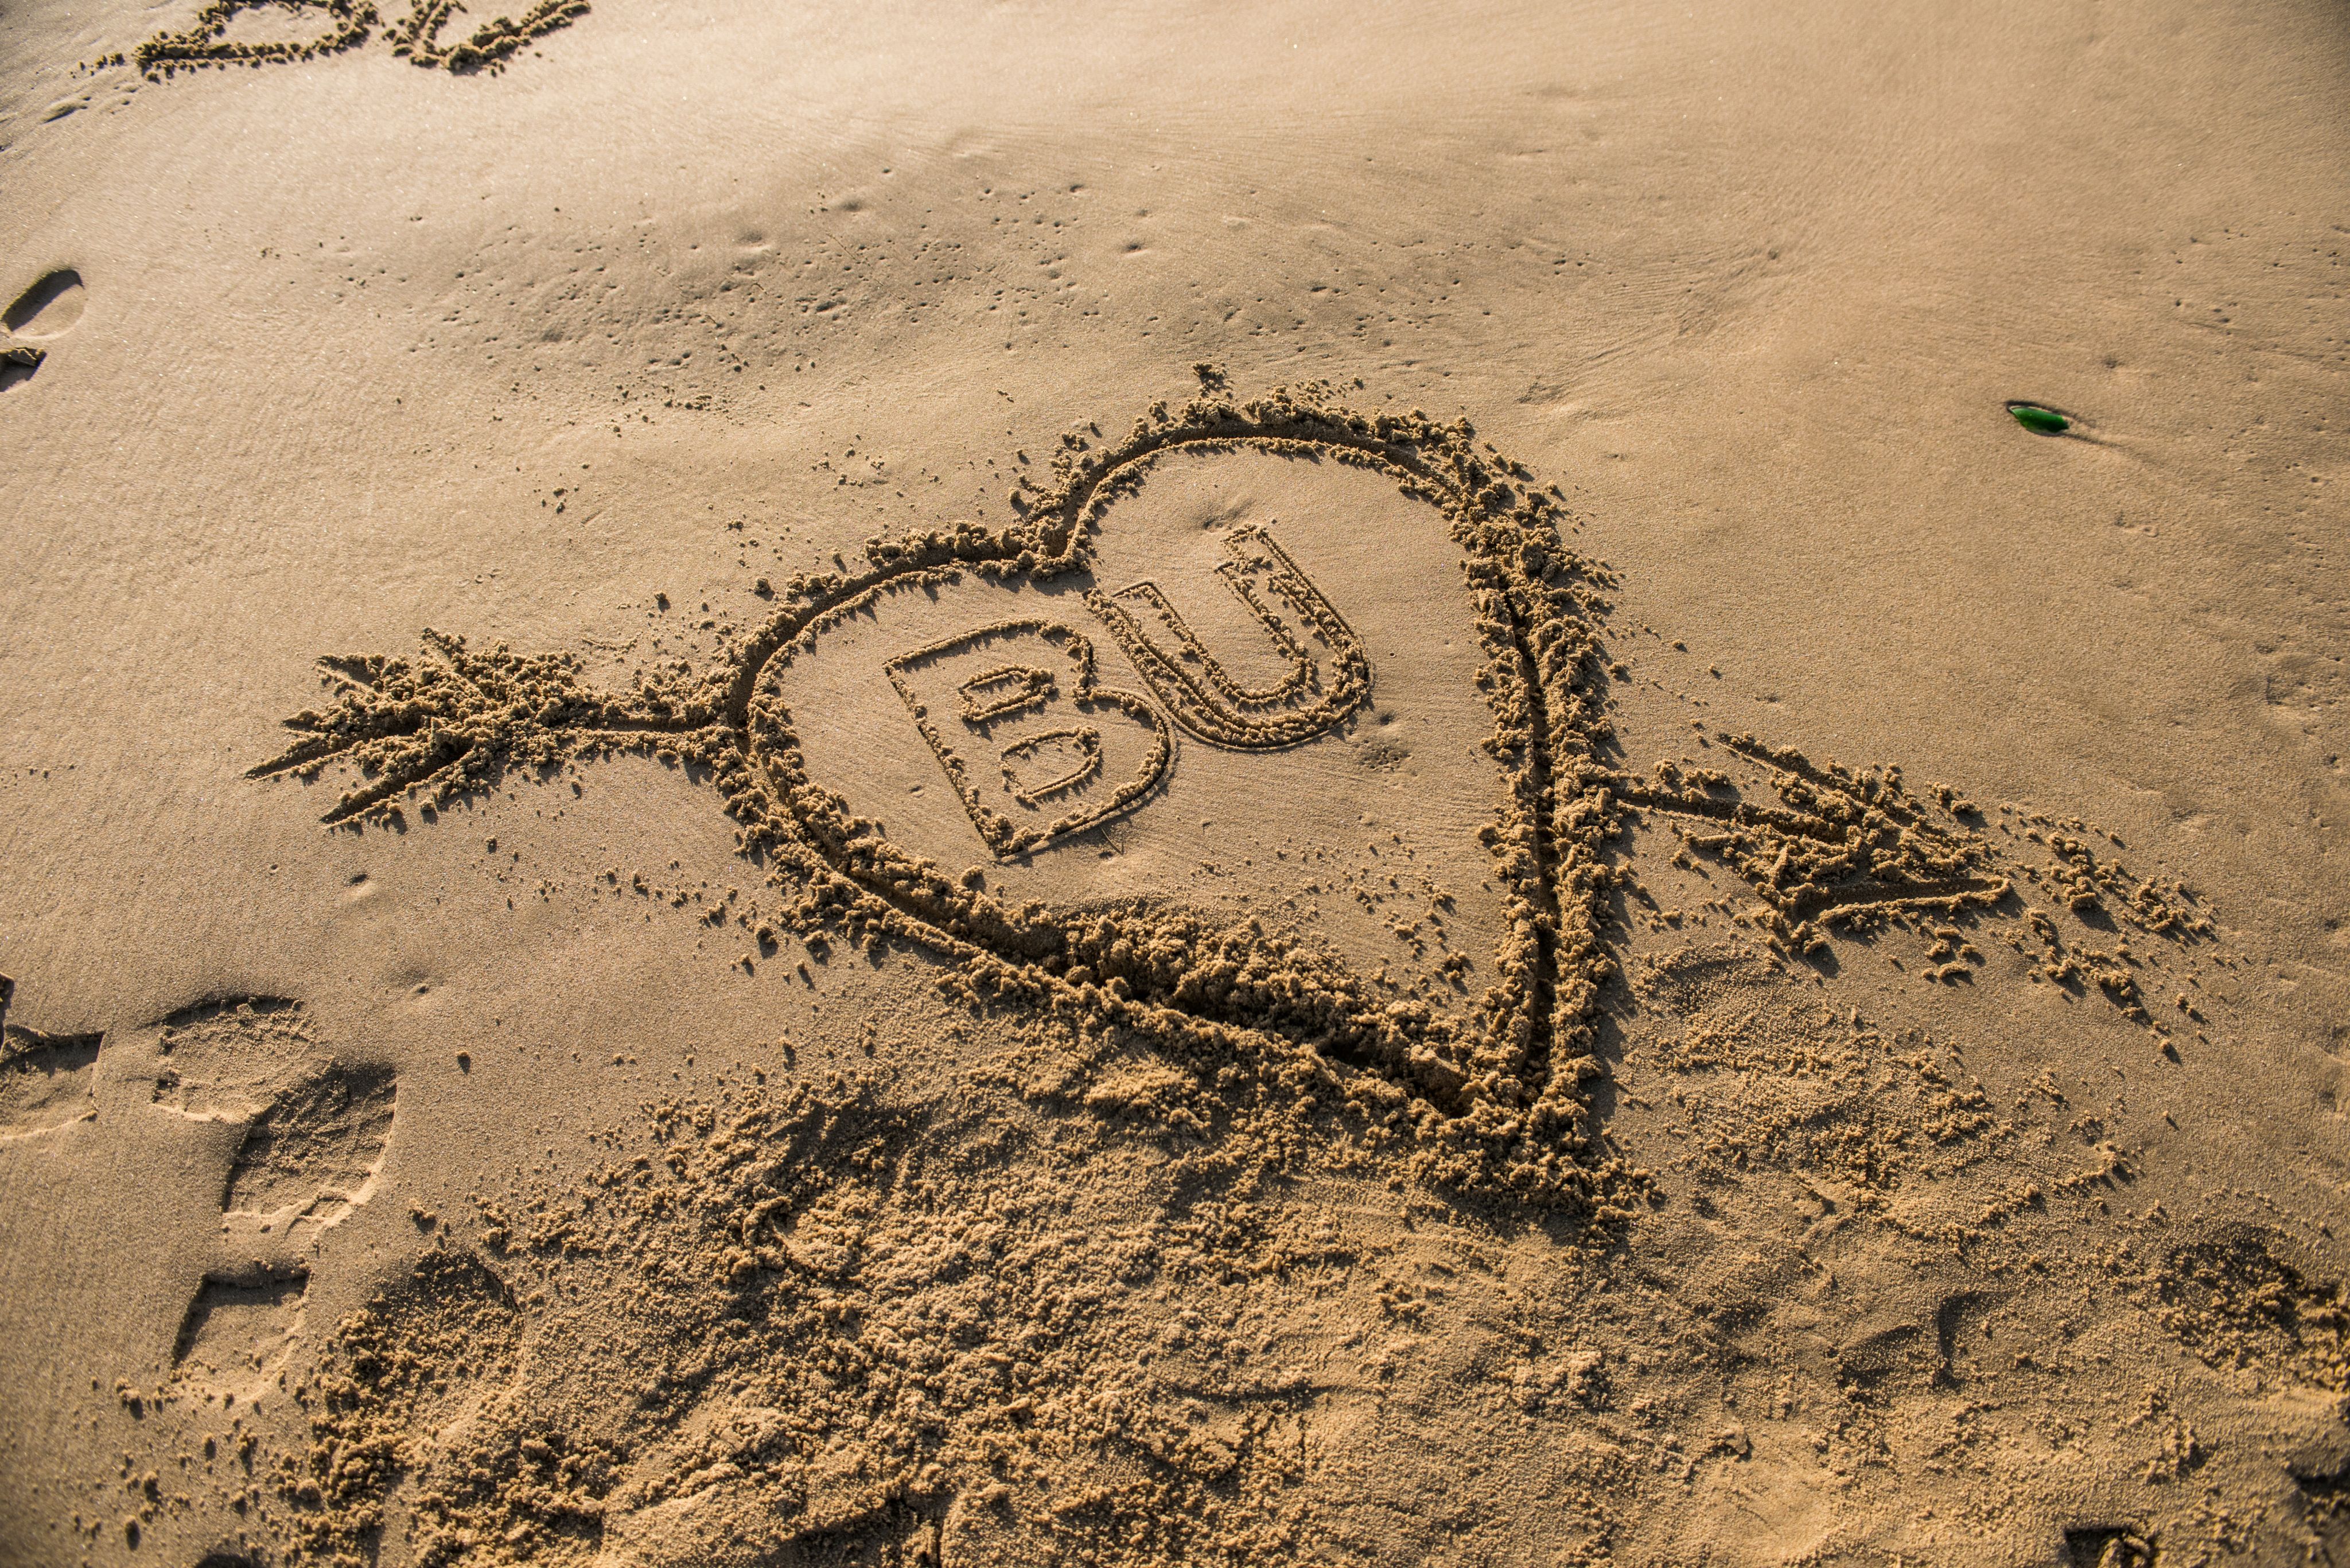 BU written in the sand surrounded by a heart